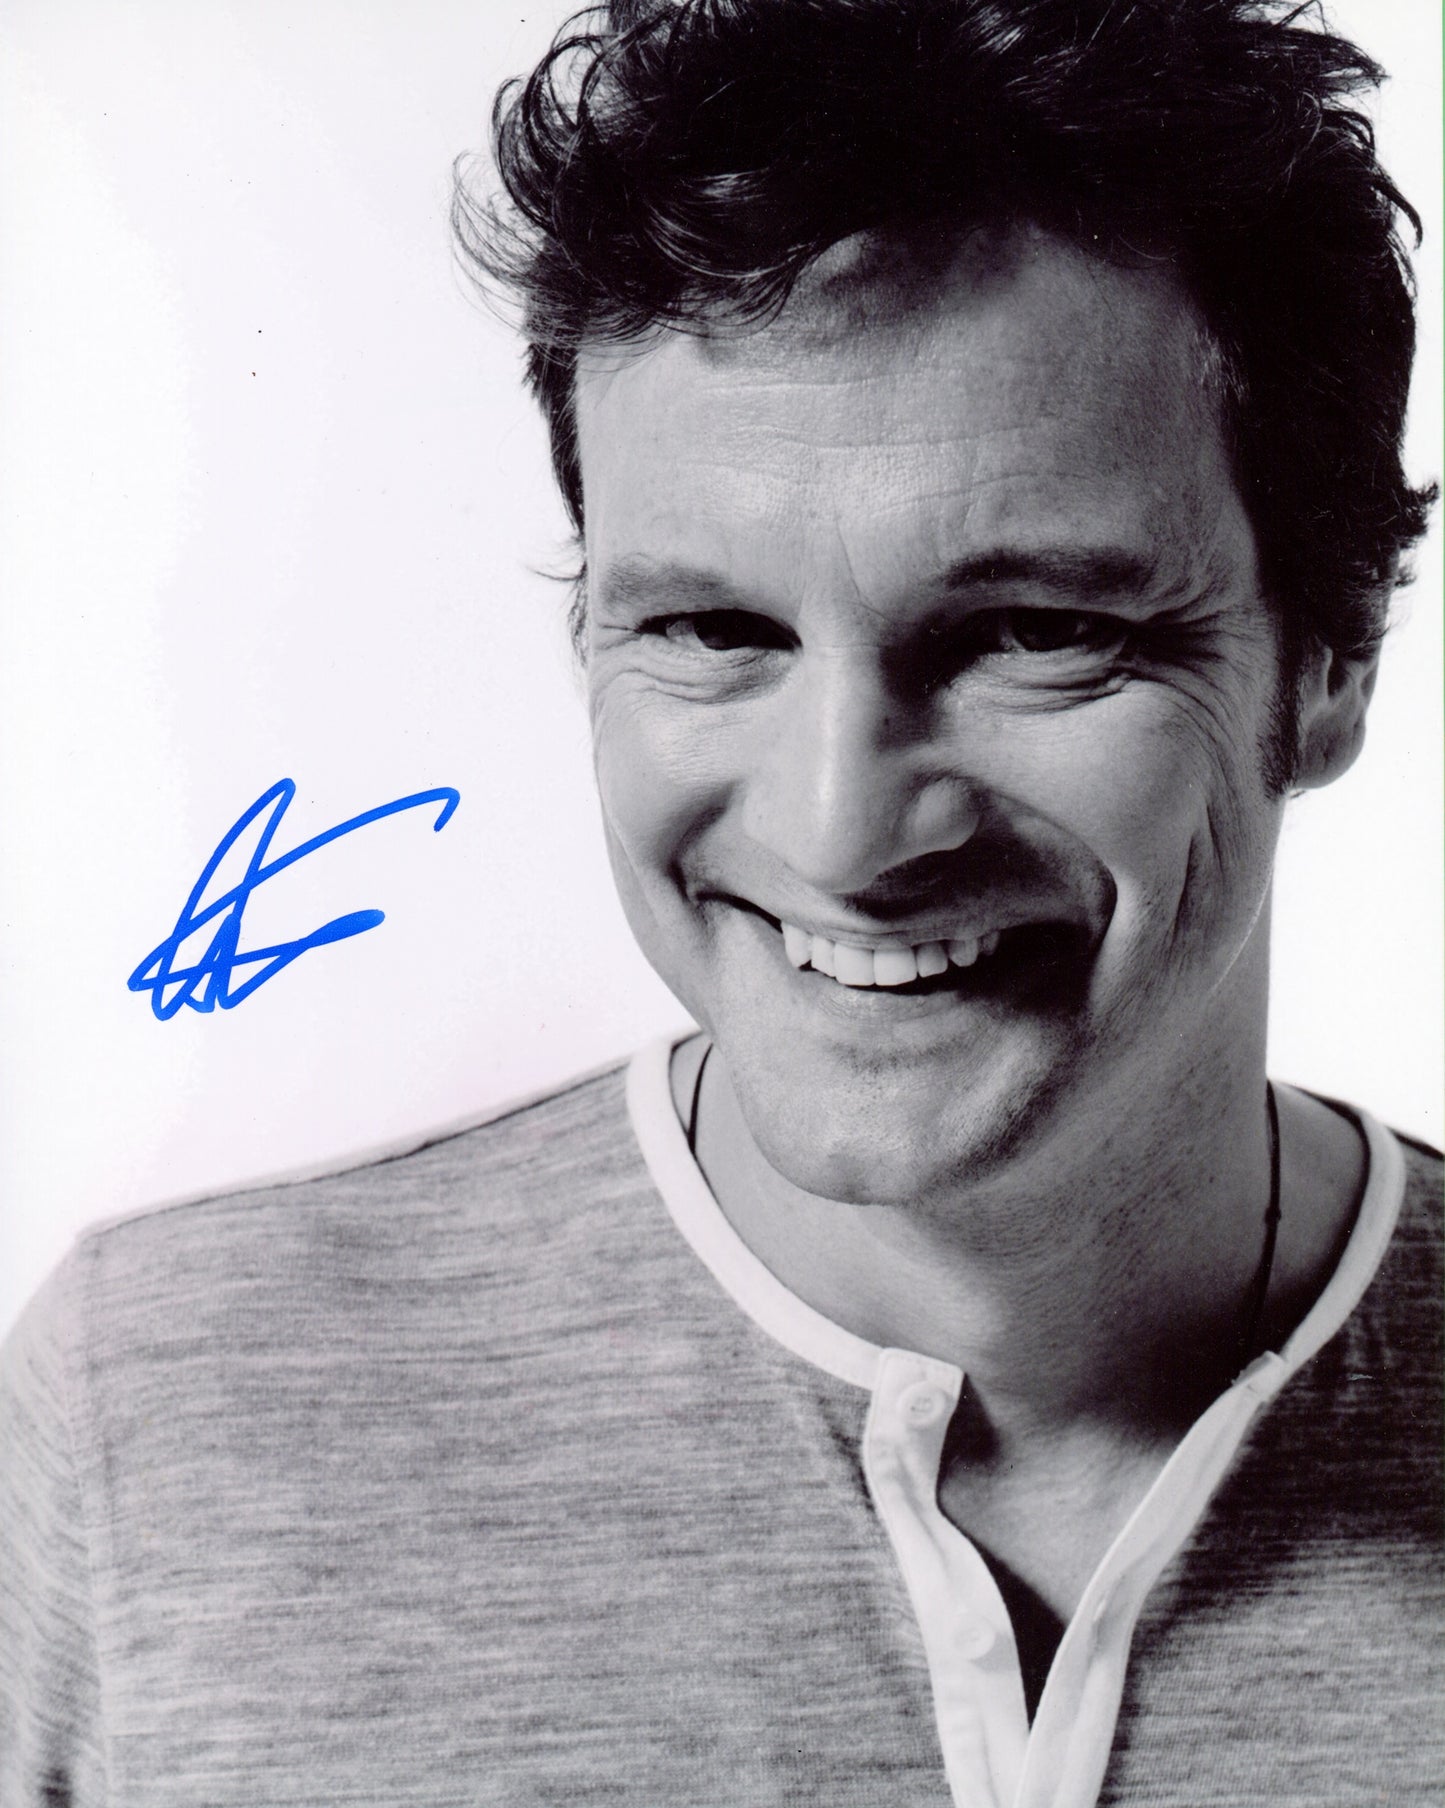 Colin Firth Signed 8x10 Photo